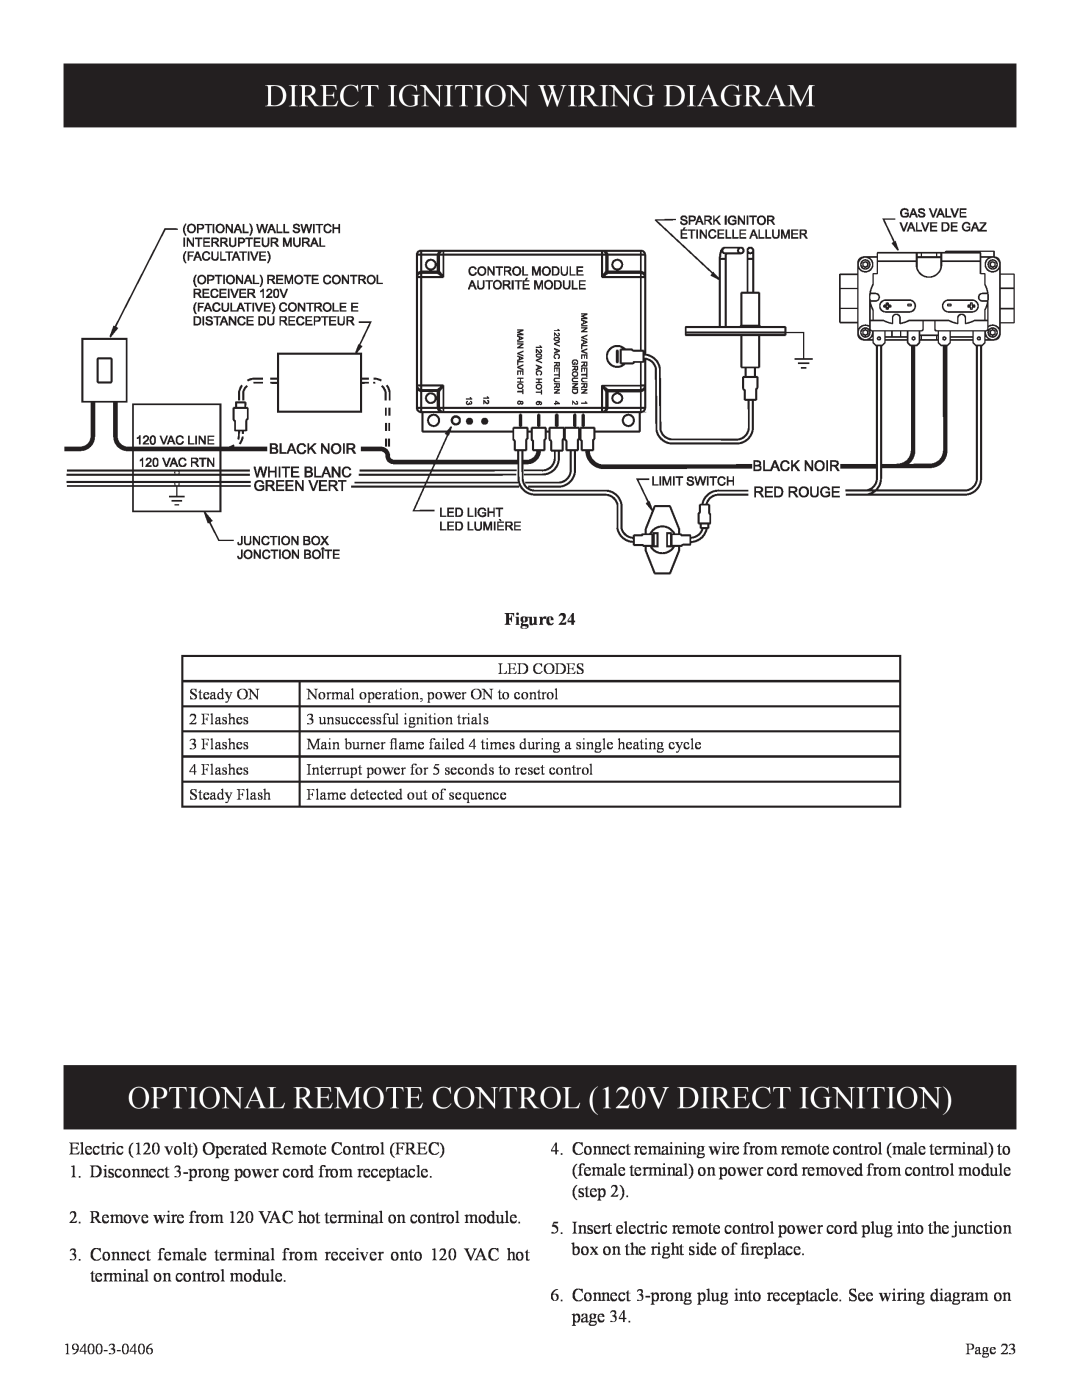 Empire Comfort Systems BVP42FP32, L)N-1 Direct Ignition Wiring Diagram, OPTIONAL REMOTE CONTROL 120V DIRECT IGNITION 